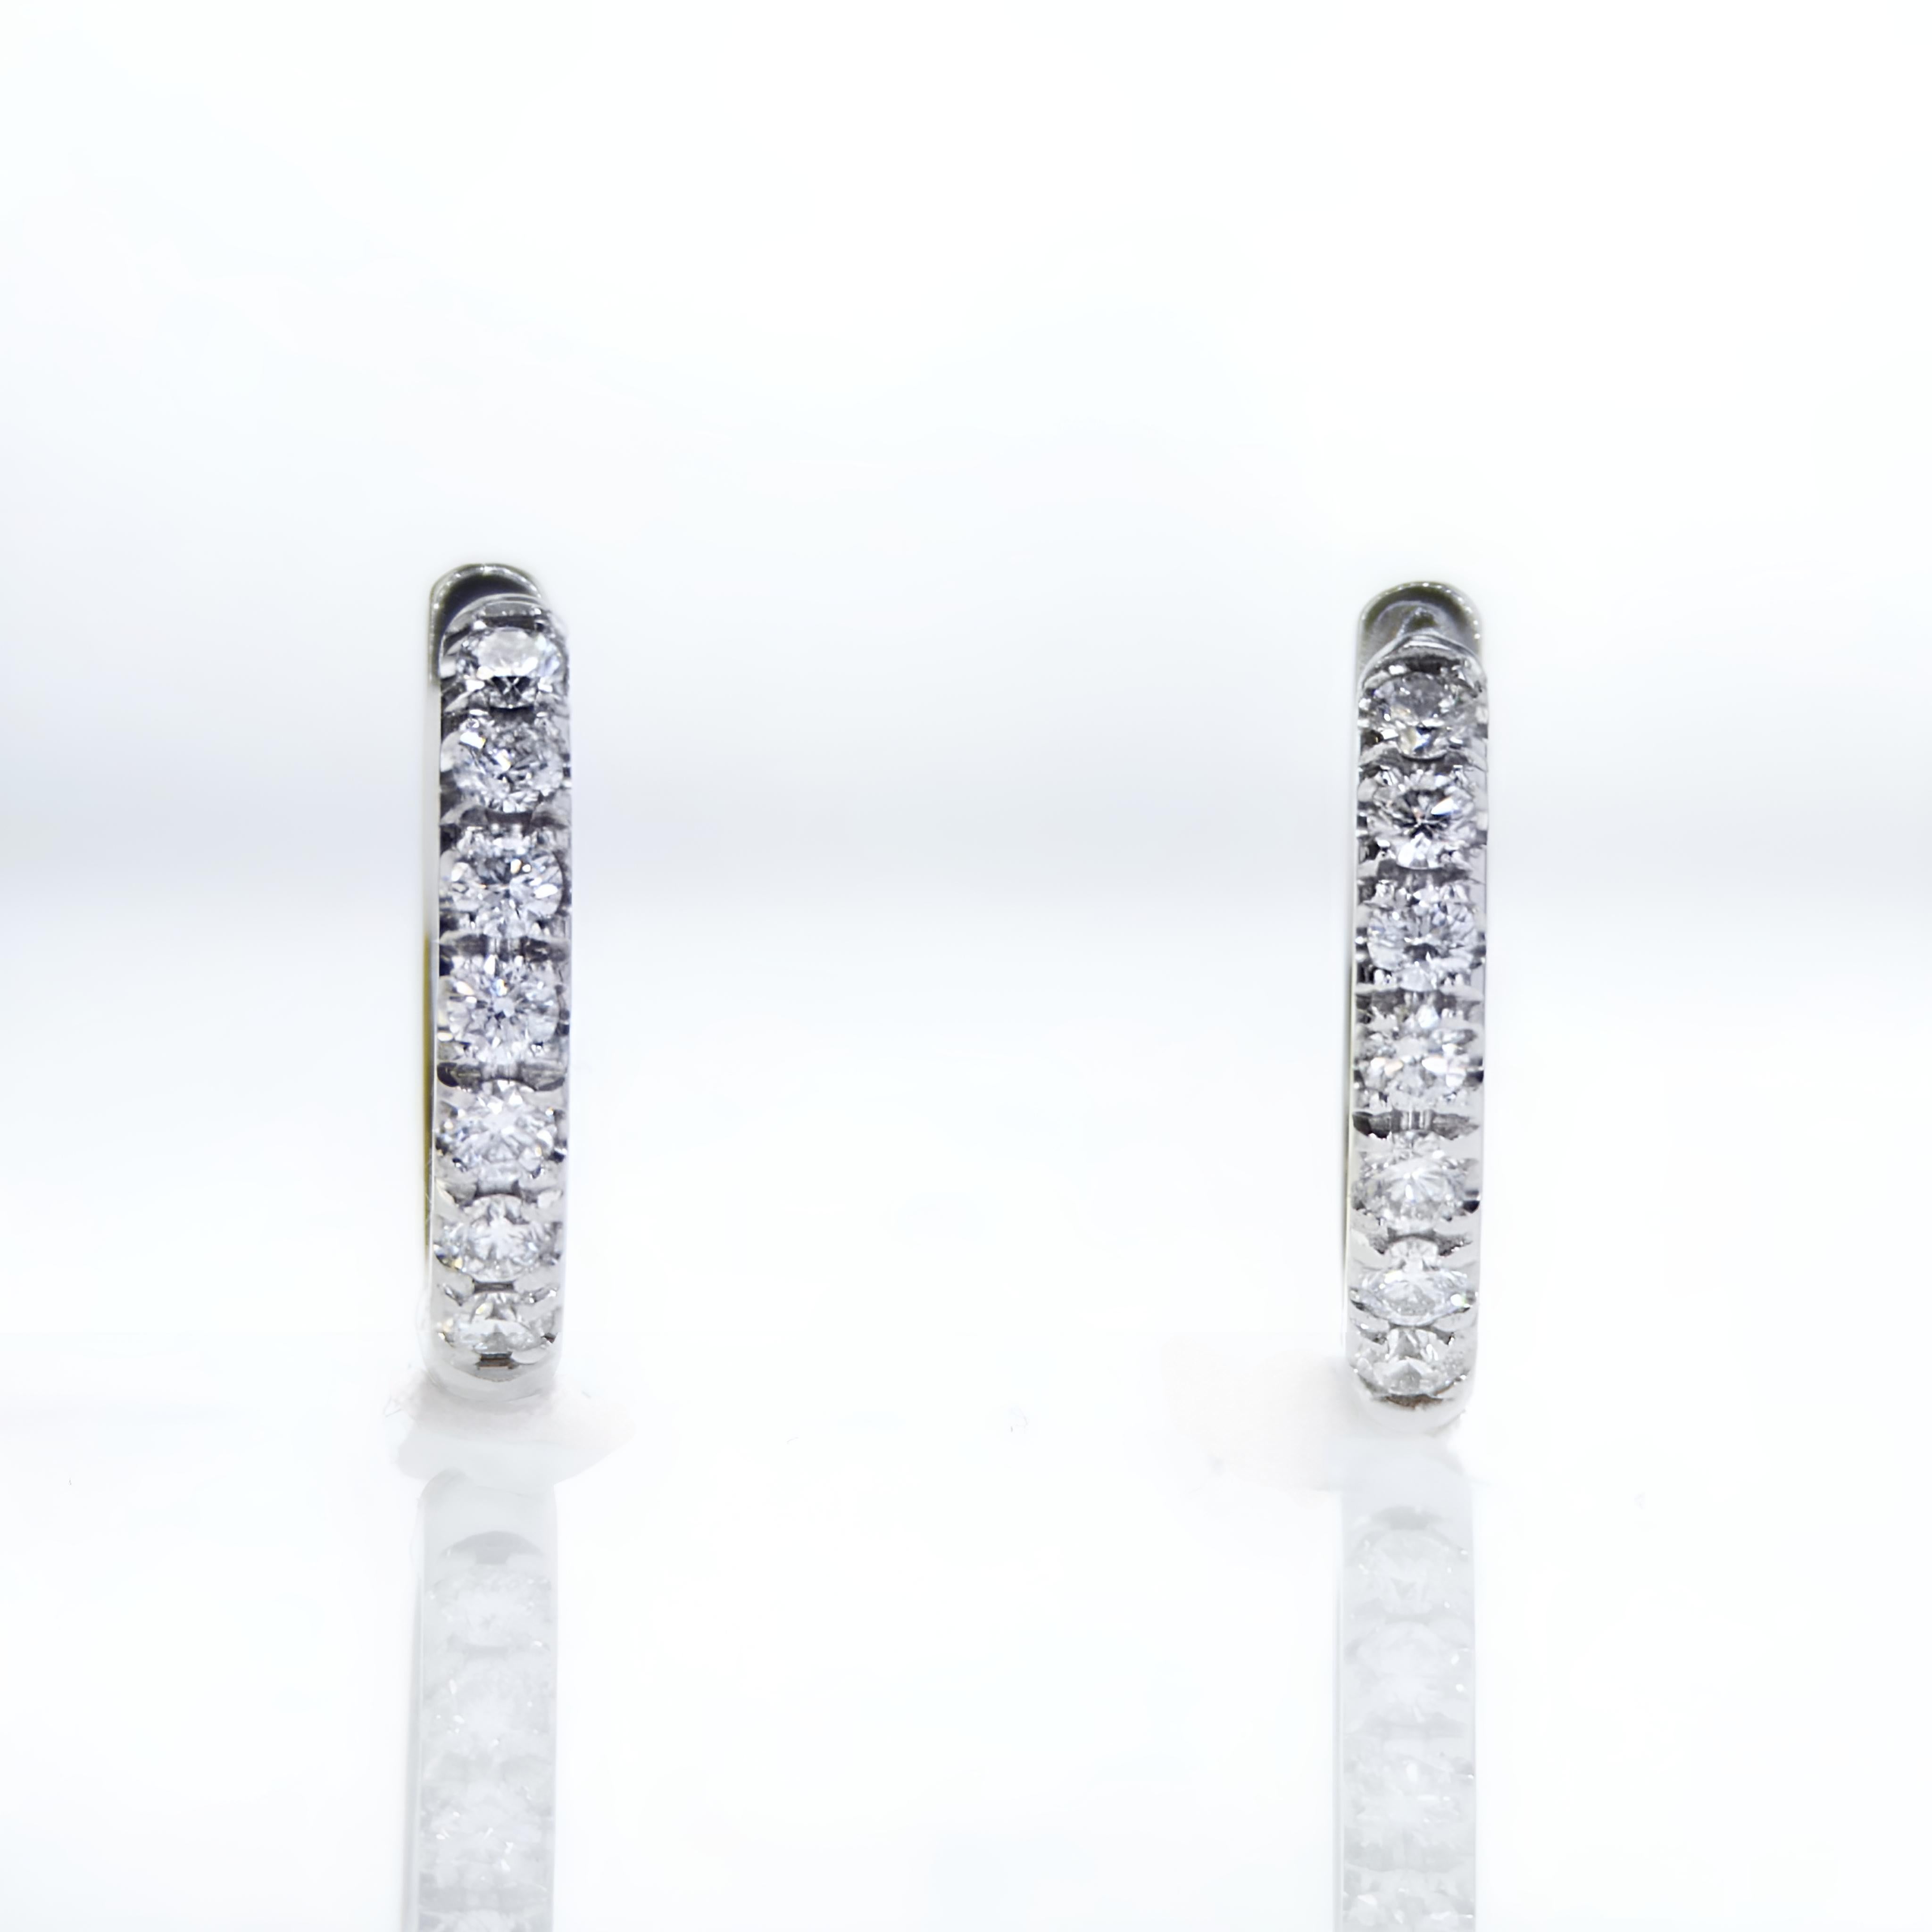 14K White Gold 0.28Ct Diamonds Hoop Earrings

Product Description:

Introducing our White Gold Diamonds Hoop Earrings, an exquisite creation that redefines elegance. Crafted with precision, this pair of hoop earrings features a total of 0.28Ct